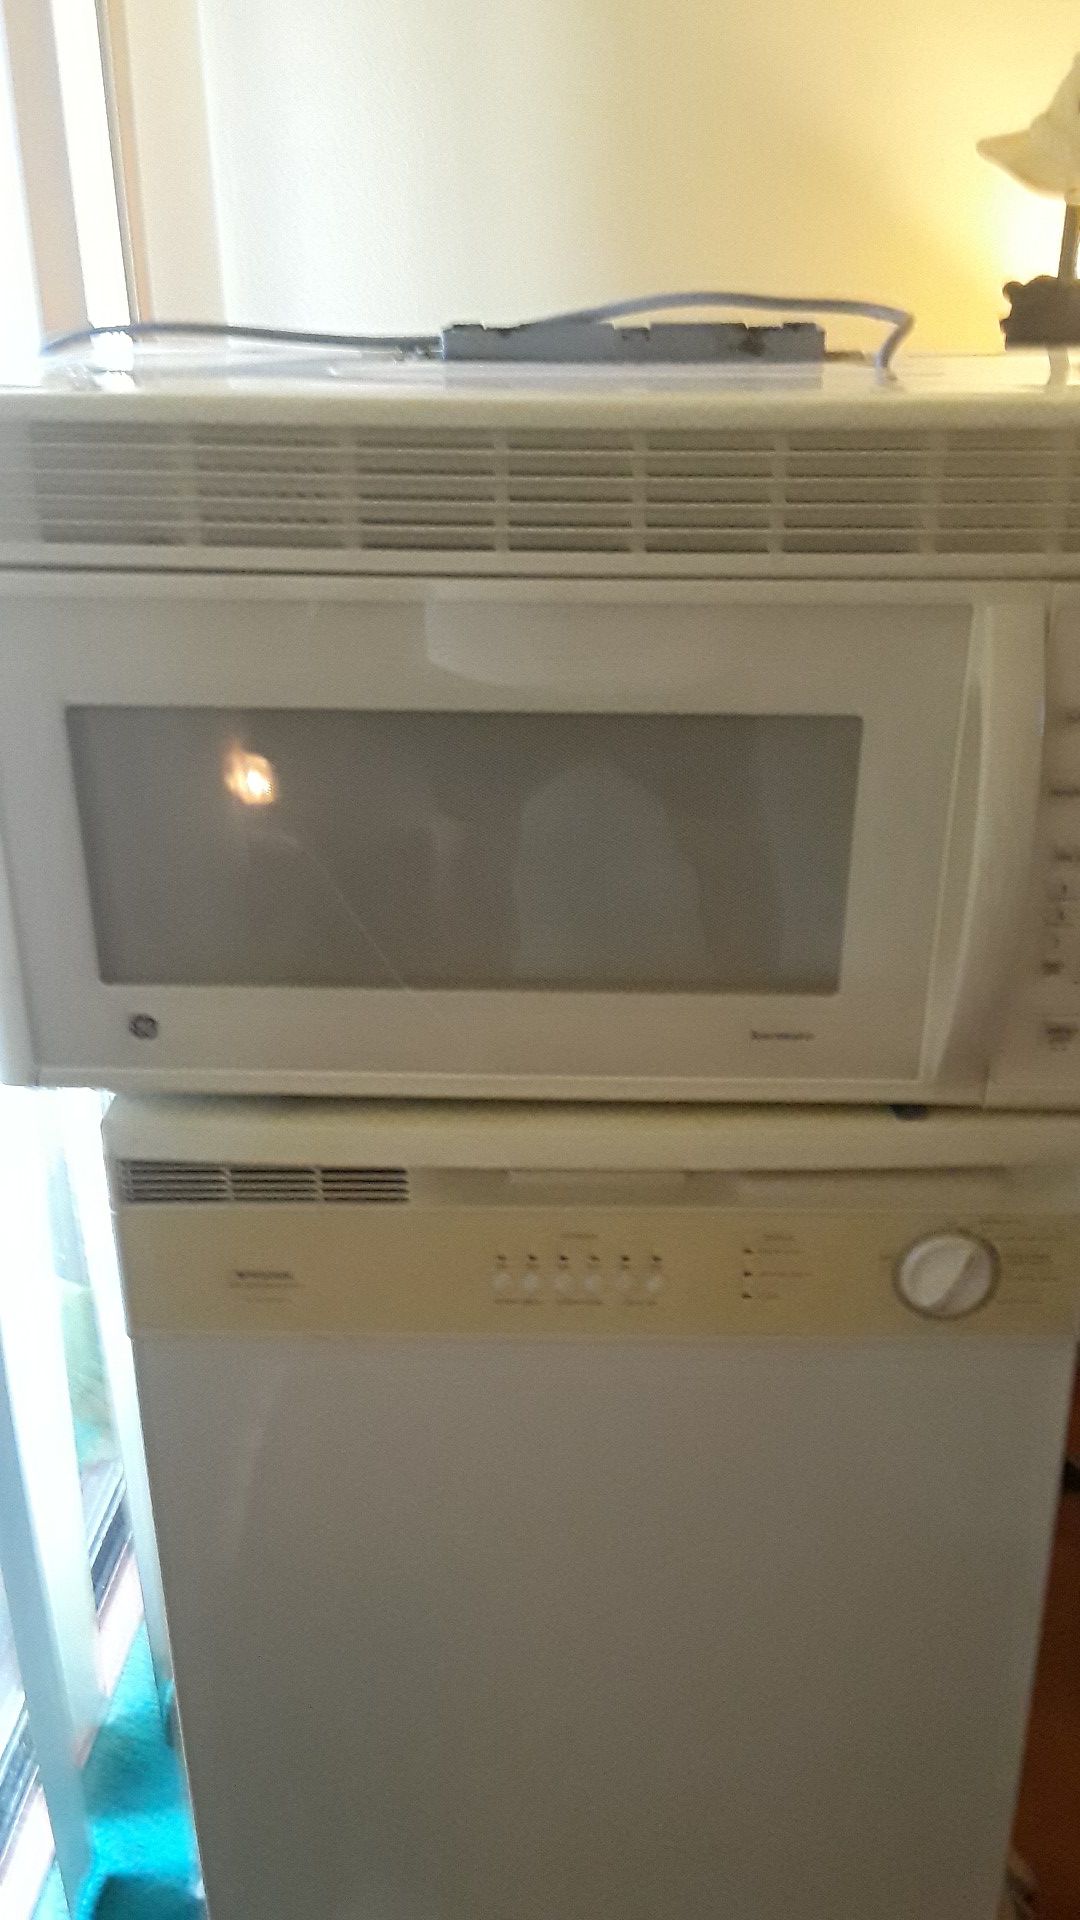 GE SPACE SAVER 1.6 ABOVE OVEN MICROWAVE!